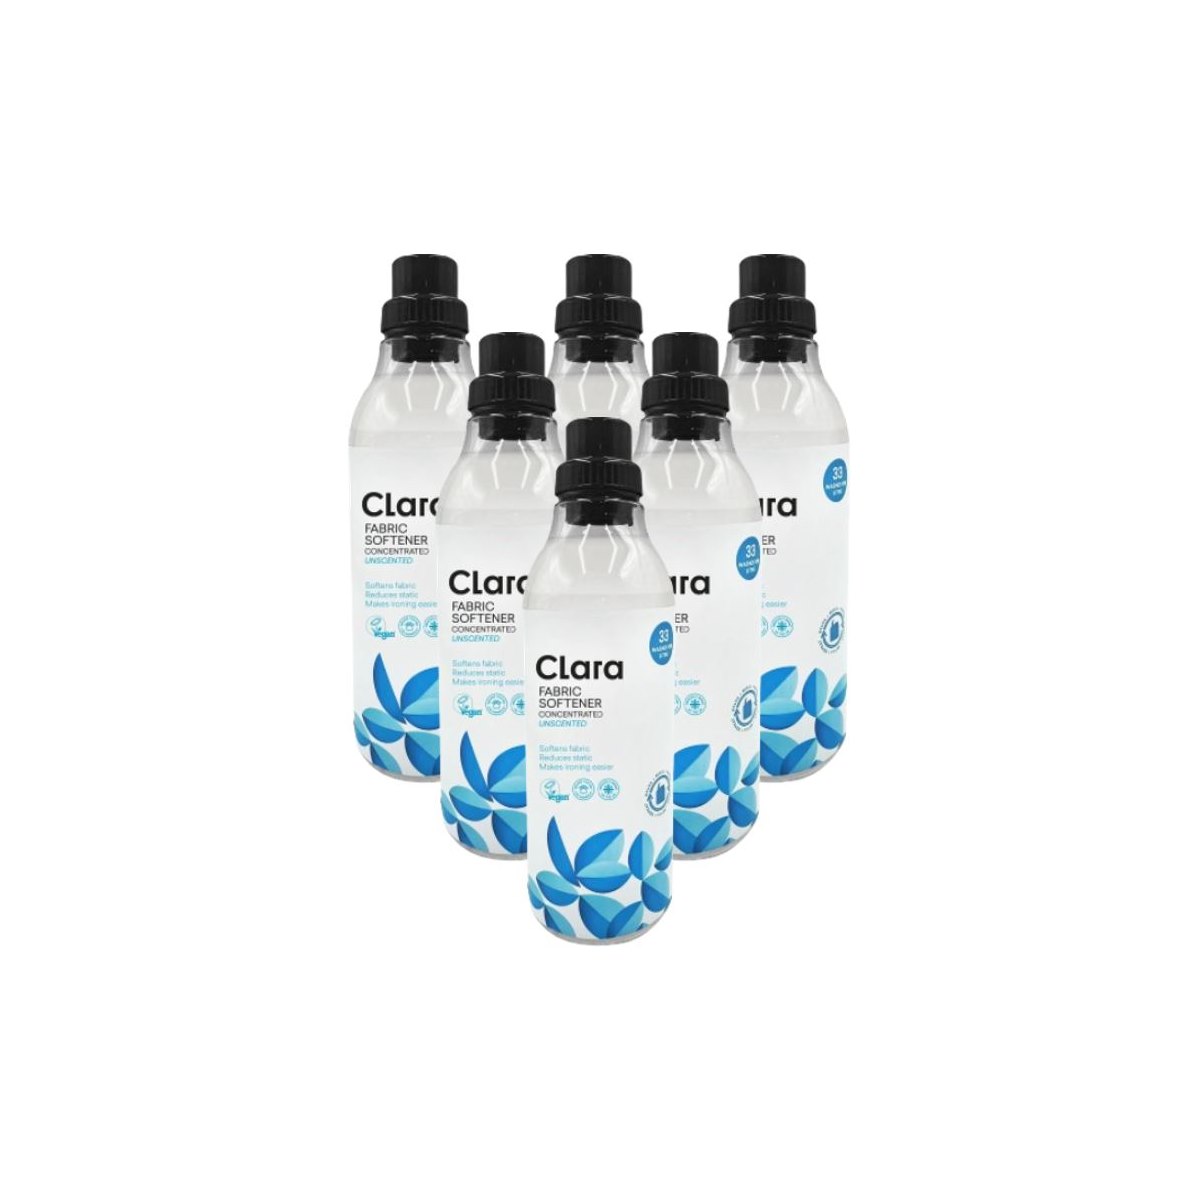 Case of 6 x Clara Concentrated Fabric Softener Unscented 1L